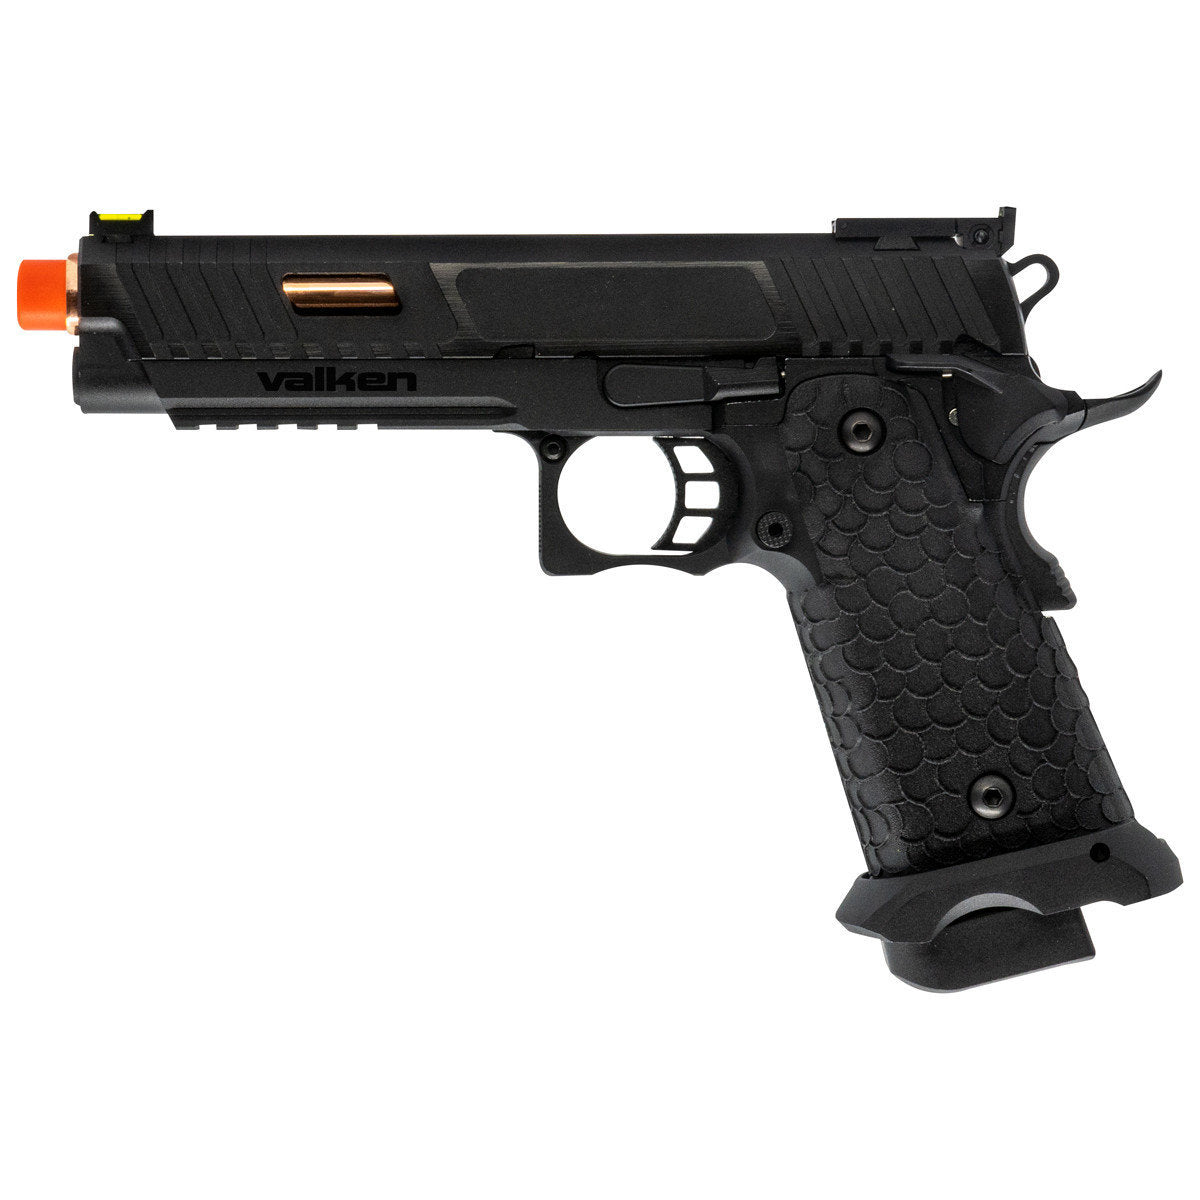 Valken By Hicapa Co2 Blowback Airsoft Pistol - Black